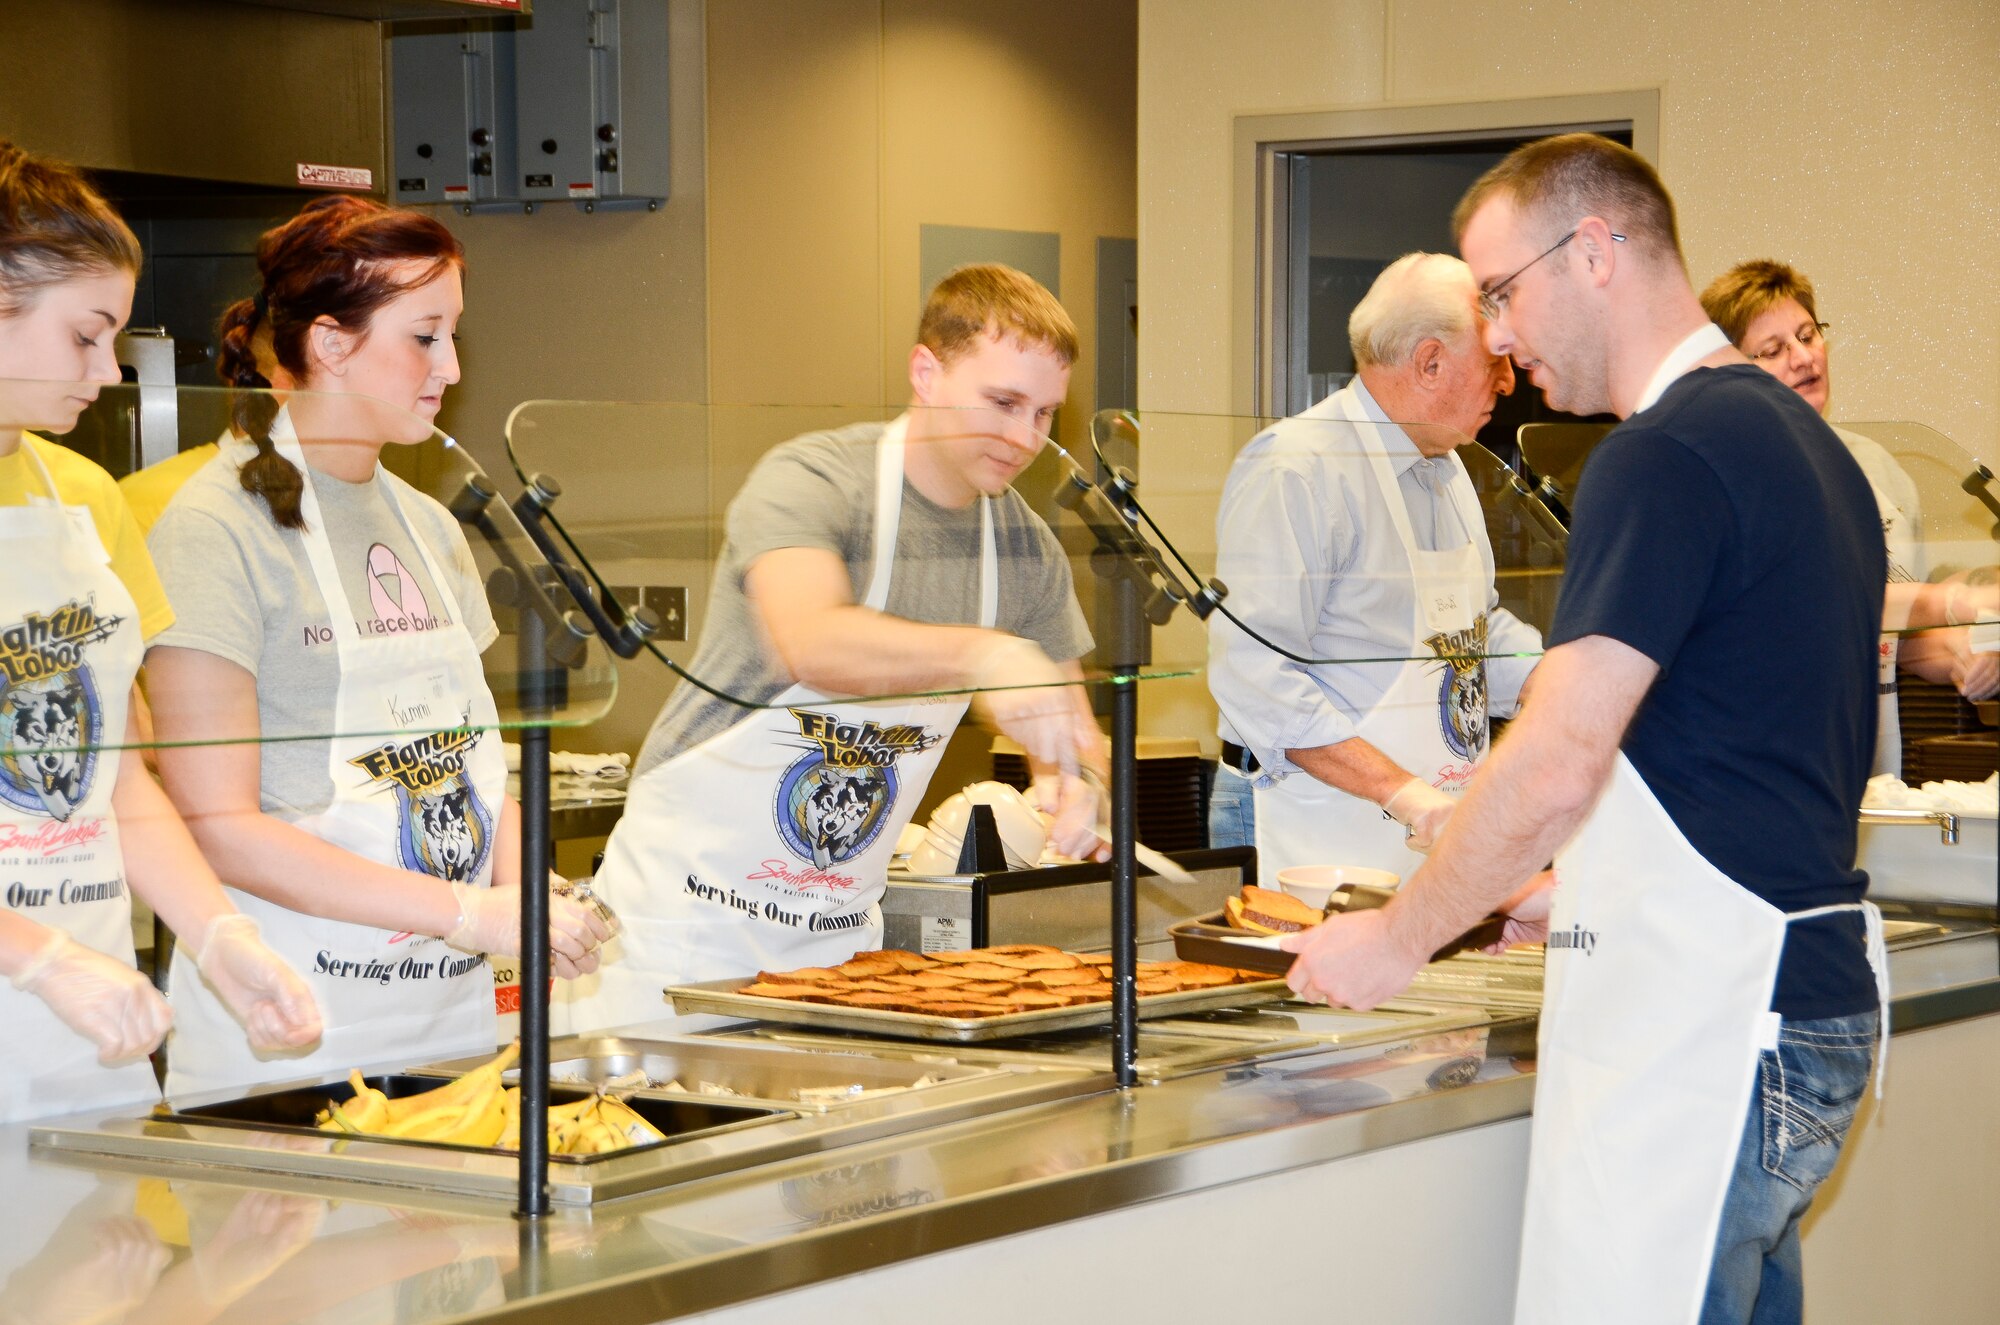 SIOUX FALLS, S.D. - Members of the Rising Six organization serve a meal at the Banquet as part of the groups community outreach program.  On that evening they served 279 meals which included 30 meals to children.(National Guard photo by Senior Master Sgt. Nancy Ausland/Released)